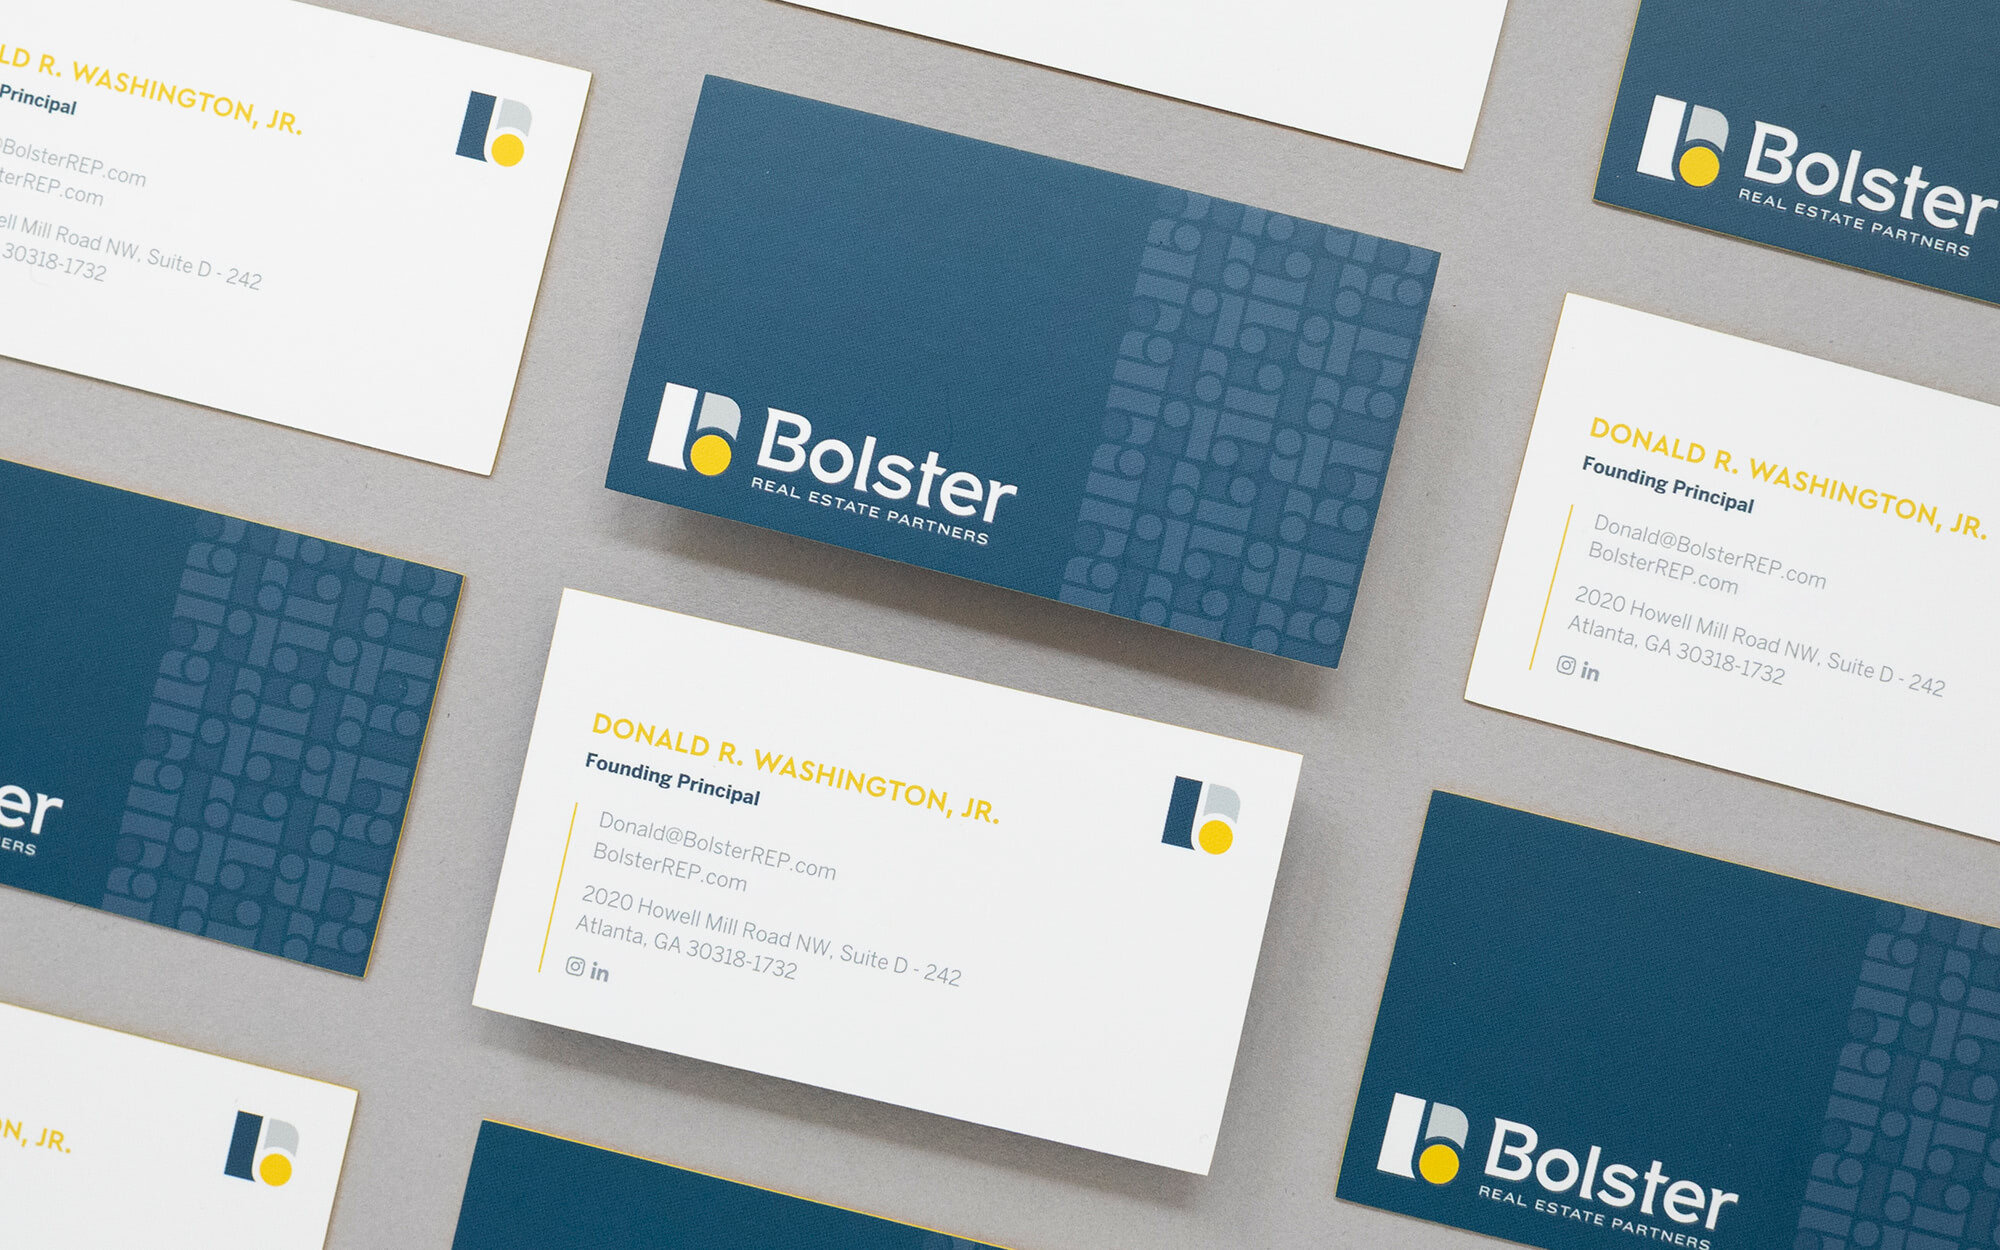 Bolster REP Business Cards laid out in tile pattern